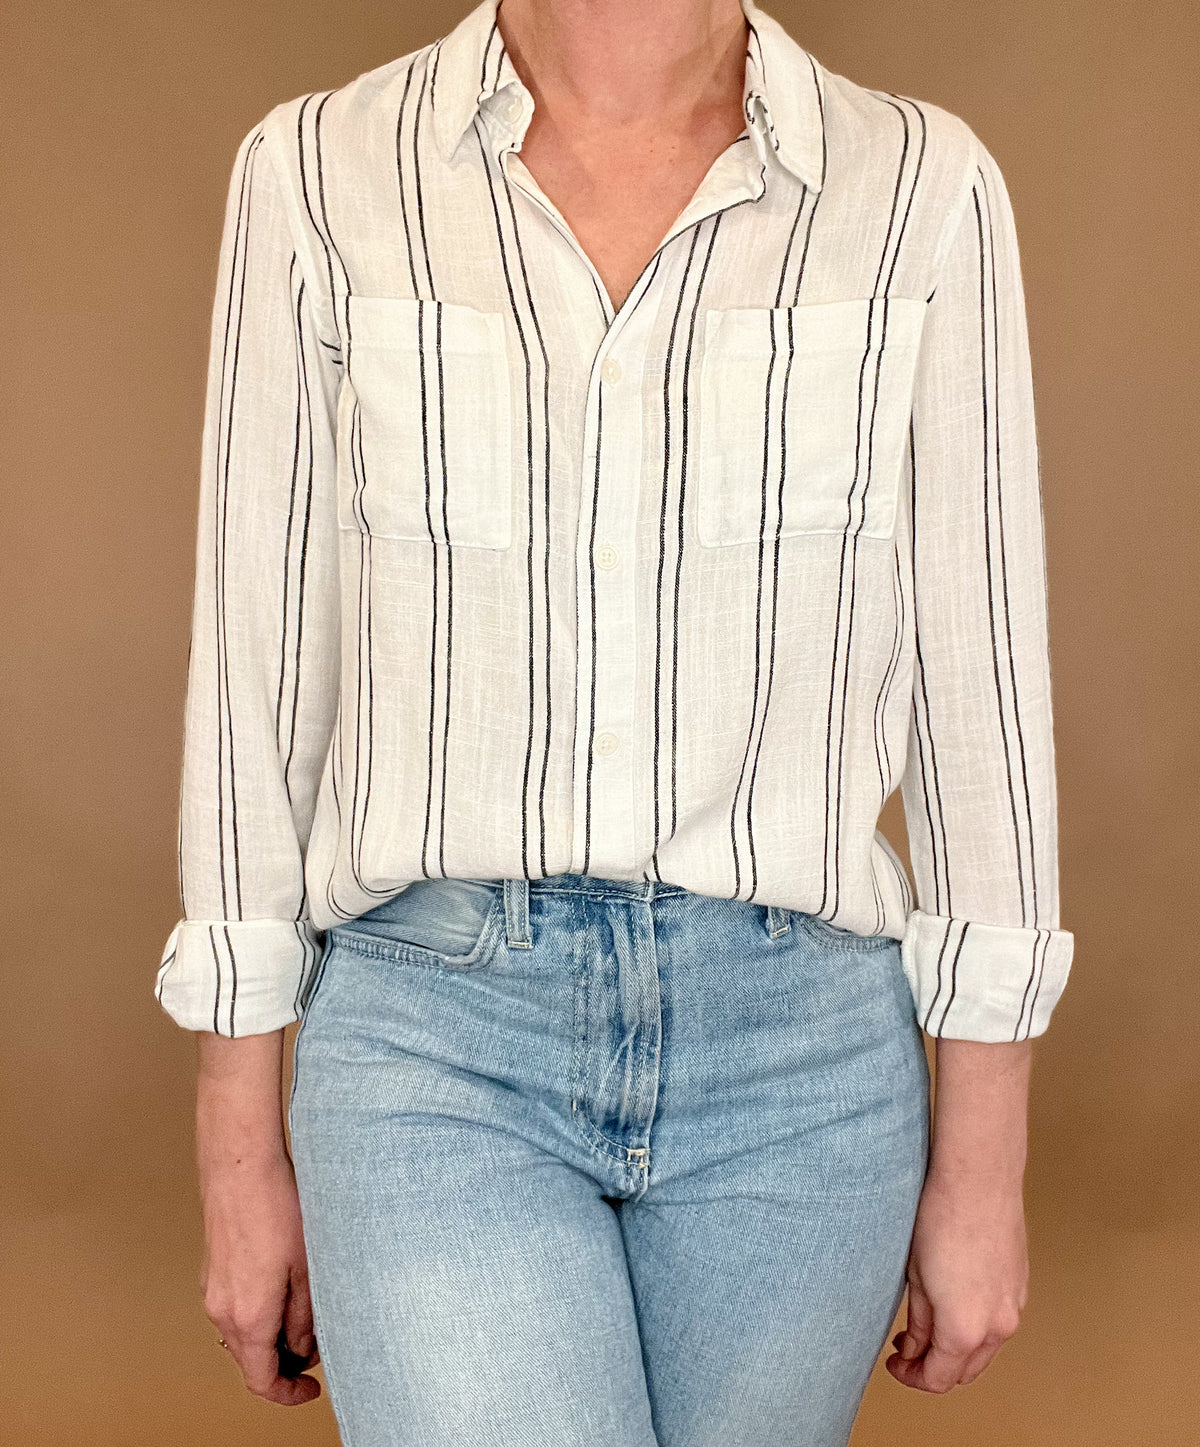 Introducing the Bestie Shirt in Black, your new companion for the spring and summer season. Made with a luxurious linen blend, this stylish striped shirt is versatile enough to pair with any casual denim and sandals. Let it be your go-to piece for effortless fashion.